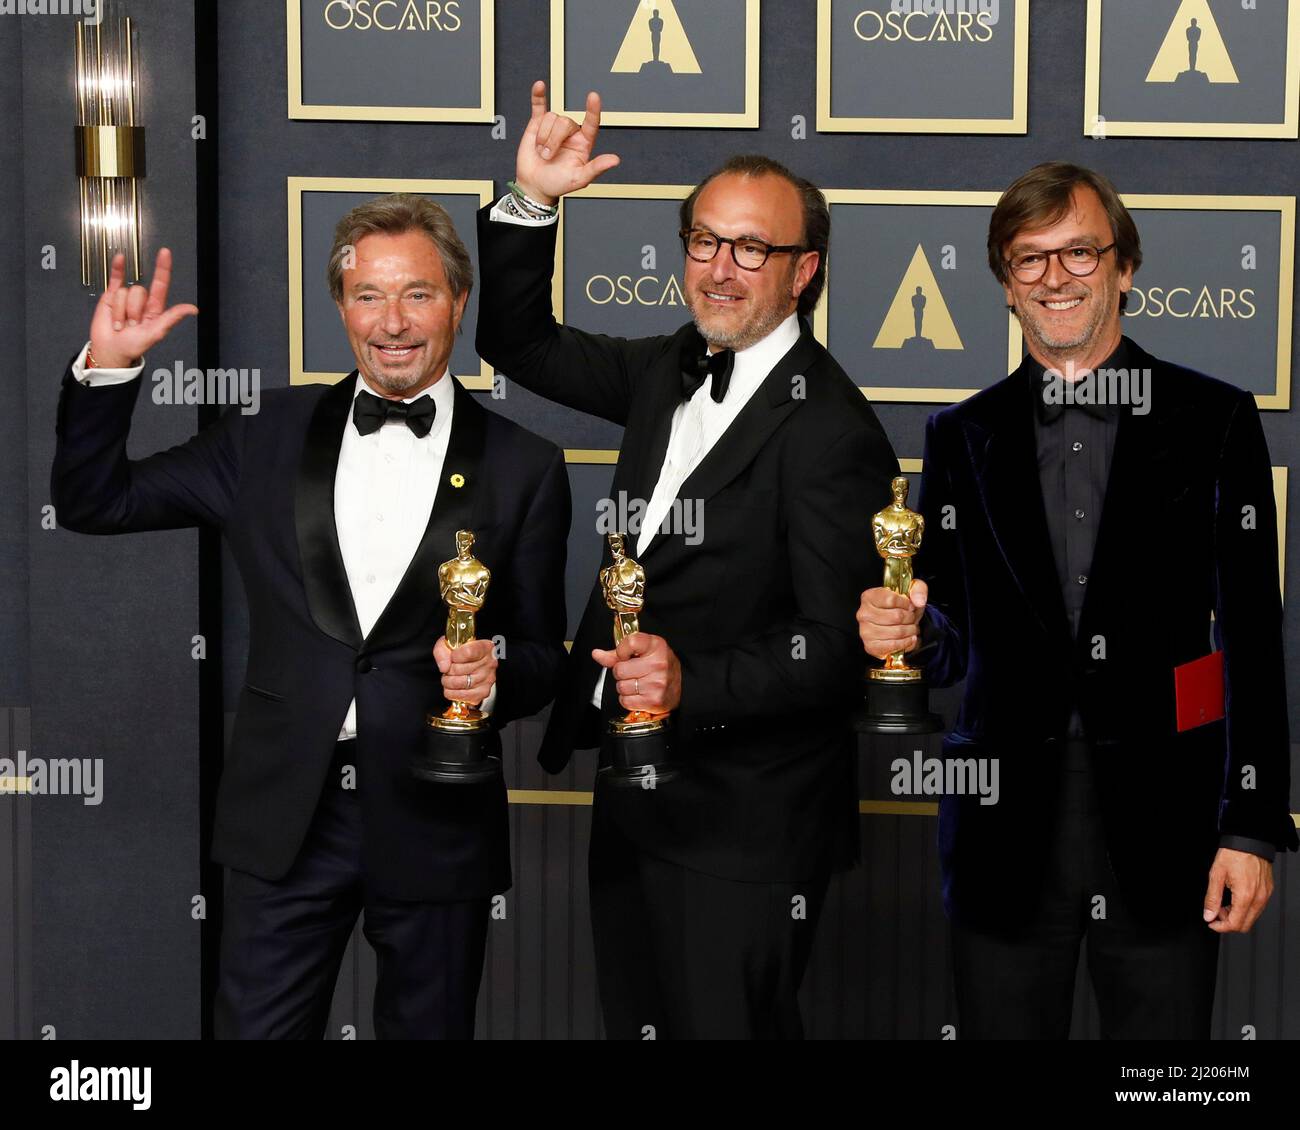 LOS ANGELES - MAR 27:  Best Picture, CODA, Philippe Rousselet, Fabrice Gianfermi, Patrick Wachsberger at the 94th Academy Awards at Dolby Theater on March 27, 2022 in Los Angeles, CA Stock Photo